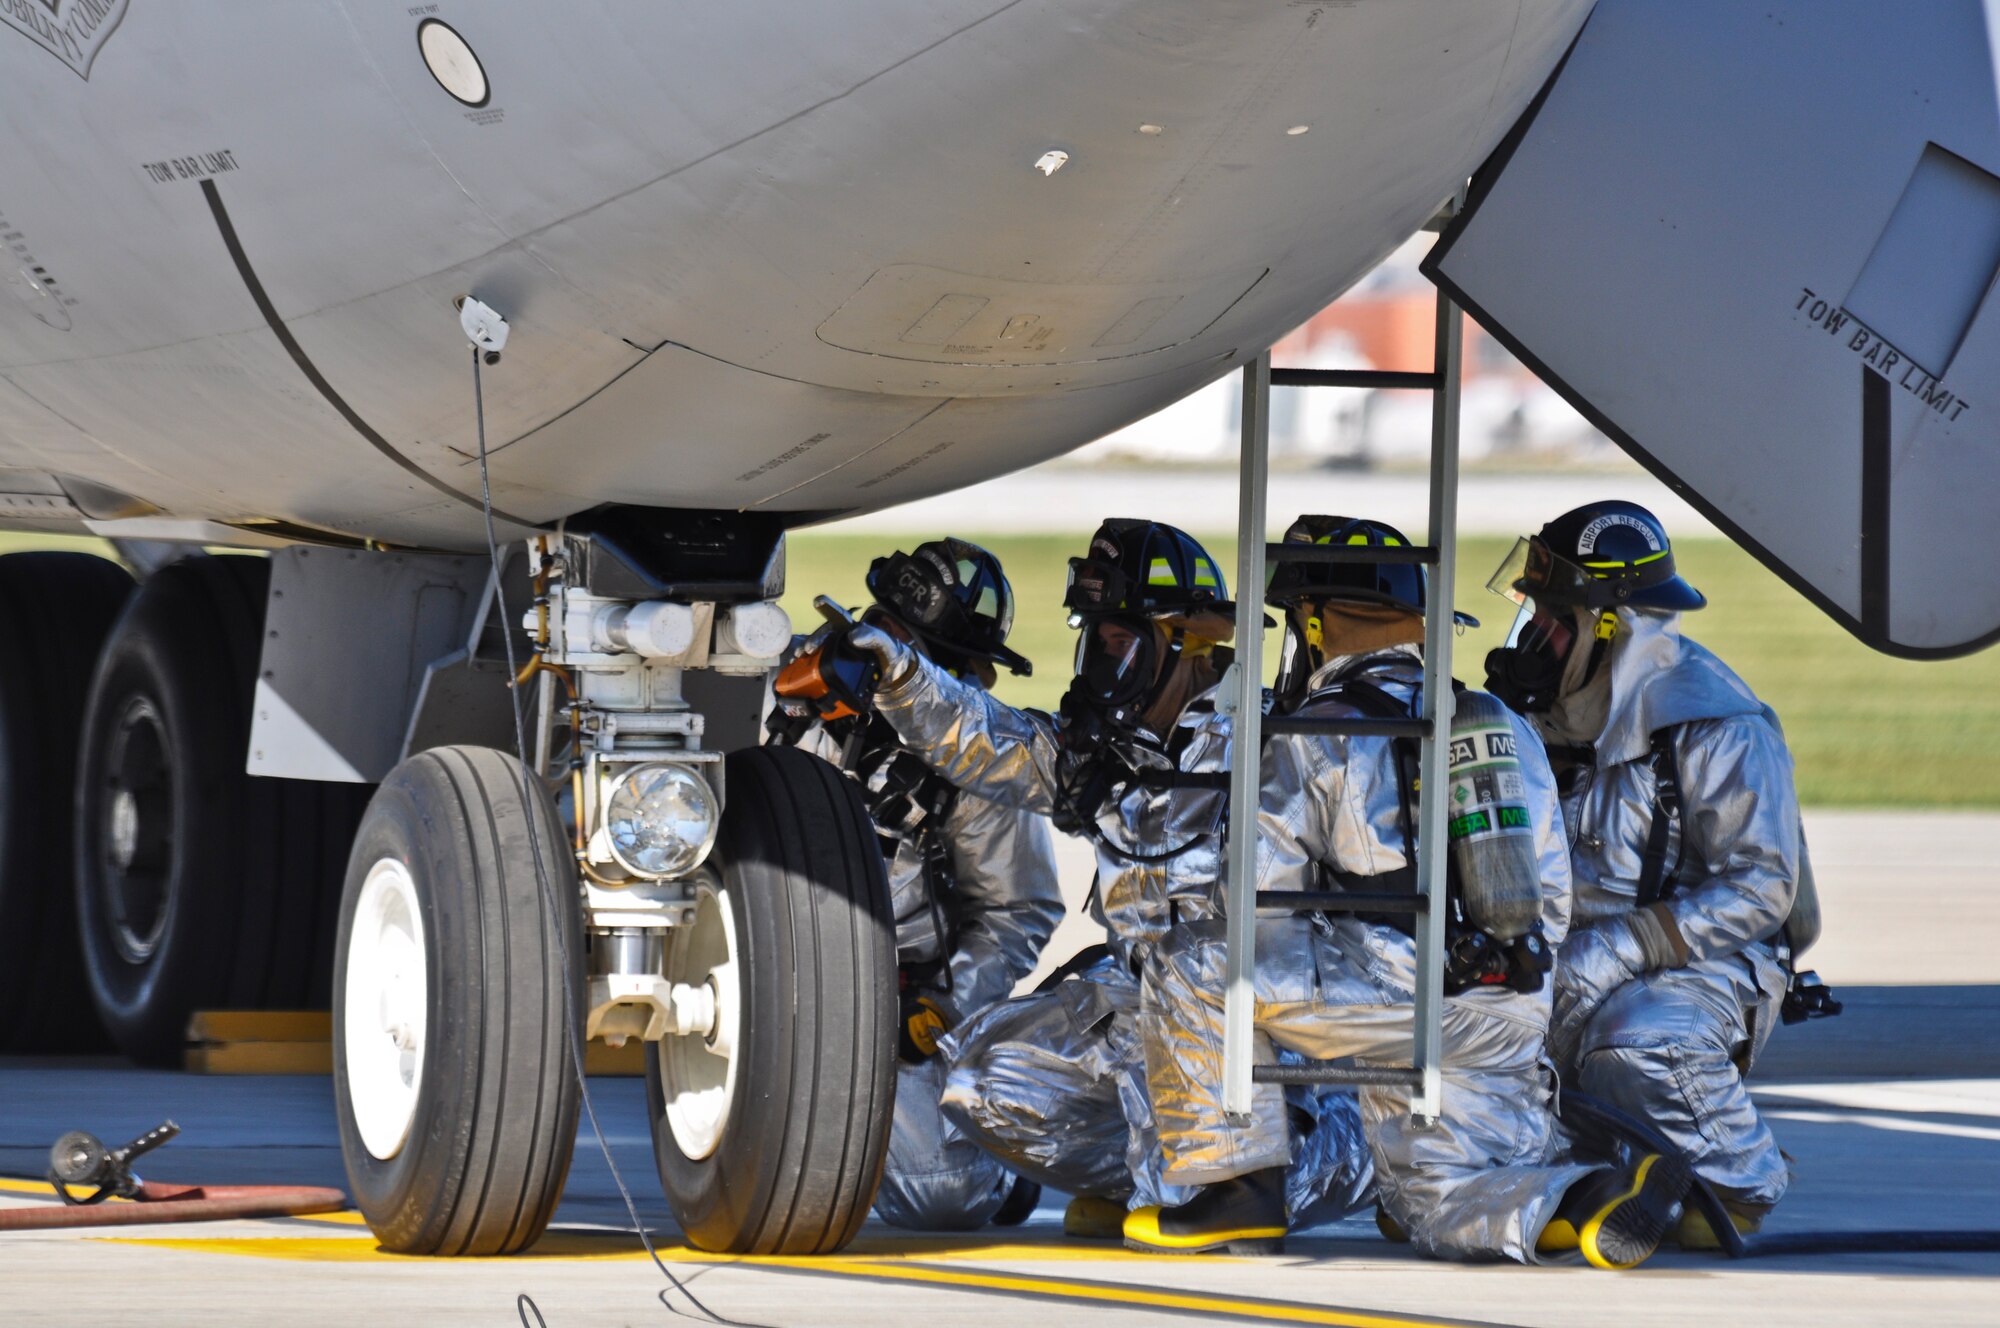 Members of the 128th Air Refueling Wing Fire Department, Milwaukee, WI respond to a preflight emergency of smoke in the cockpit of a KC-135 Stratotanker on September 30th, 2010. A member of the fire department points toward where the equipment malfunction occurred after conducting a residual heat signature scan with a thermal imaging device. The aircraft was returned to Maintenance without incident. Air Force photo by SSgt Jeremy Wilson (Released)